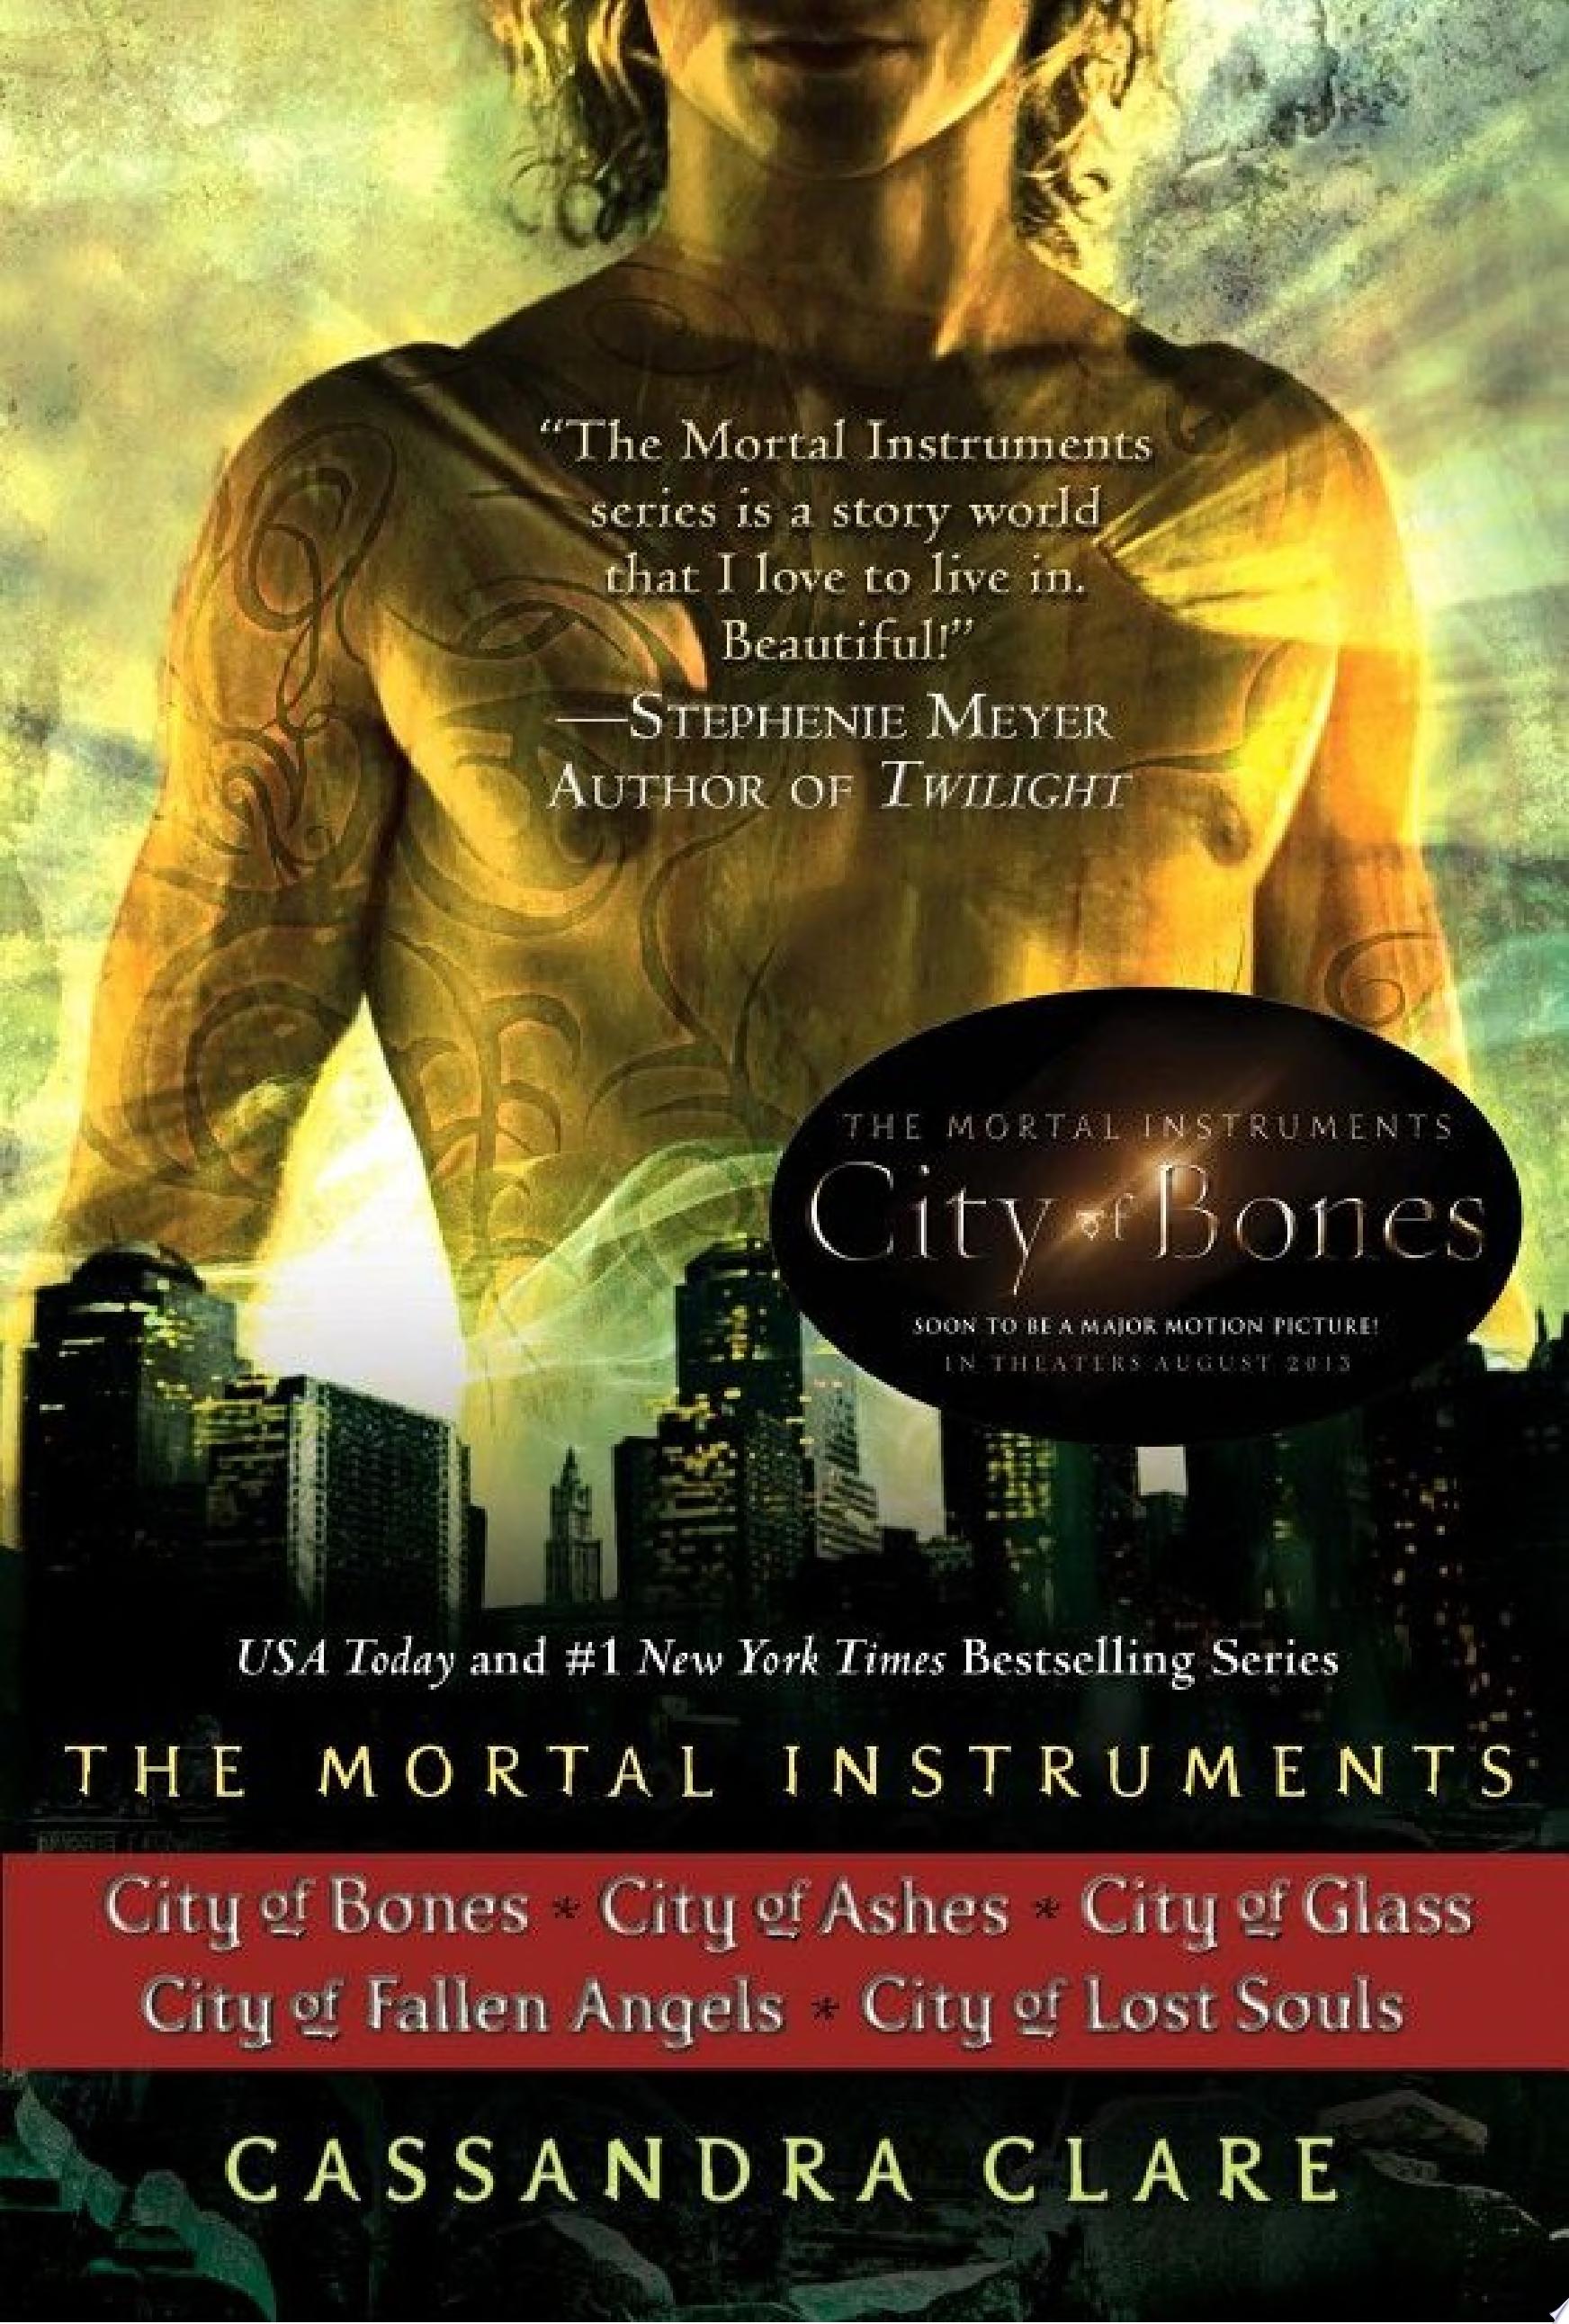 Image for "Cassandra Clare: The Mortal Instruments Series (5 books)"